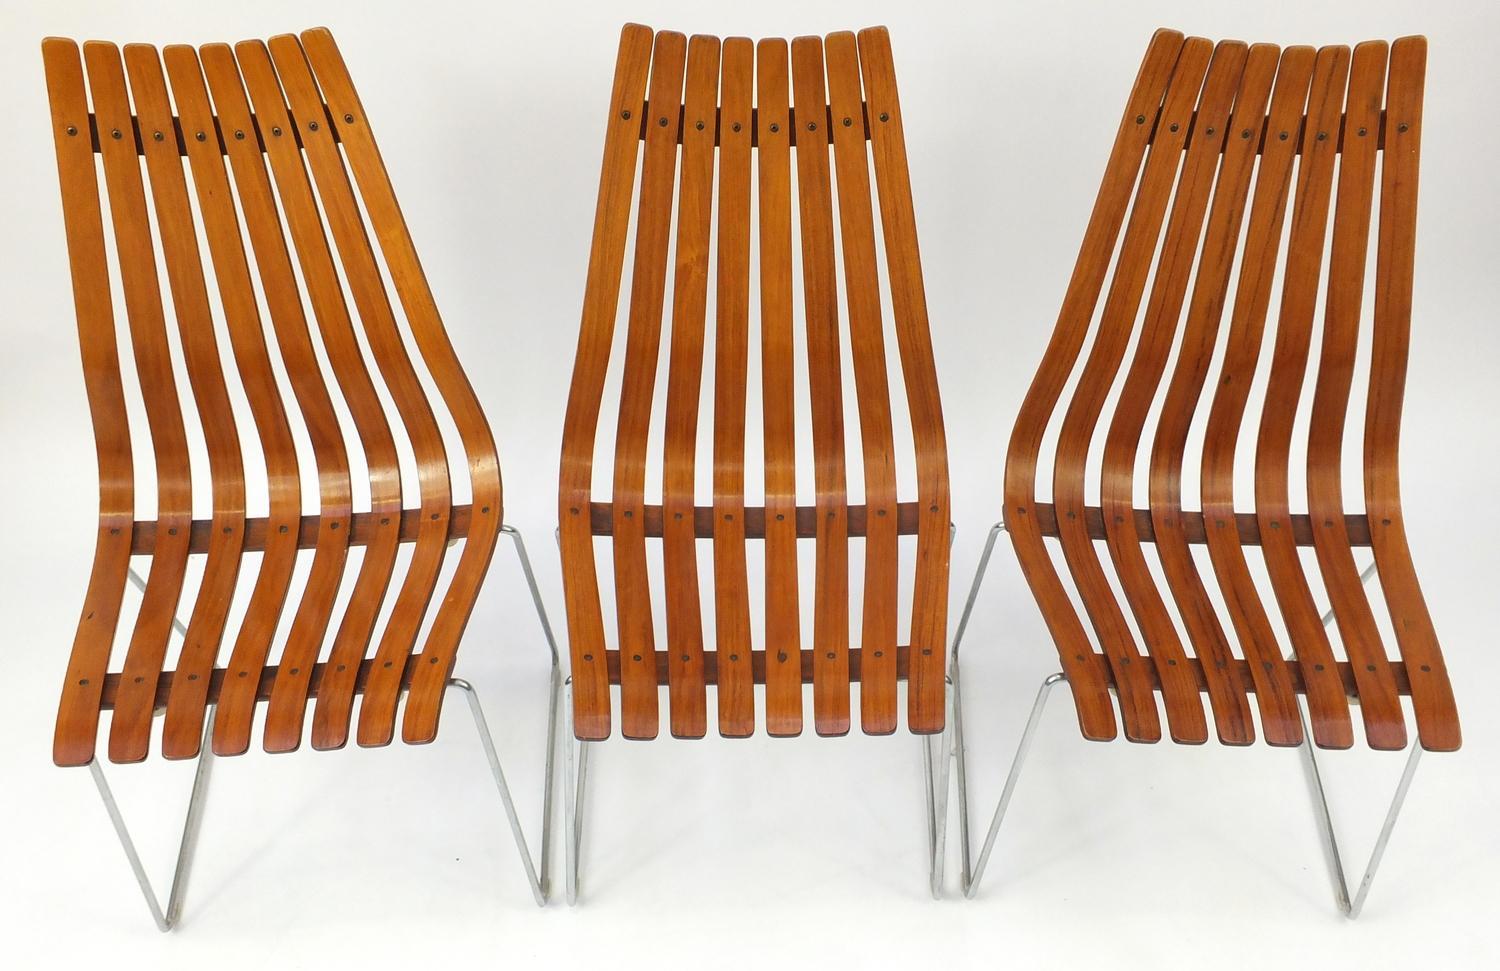 Mid-20th Century Hans Brattrud Rosewood Dining Table & Six Scandia Chairs, Hove Mobler circa 1965